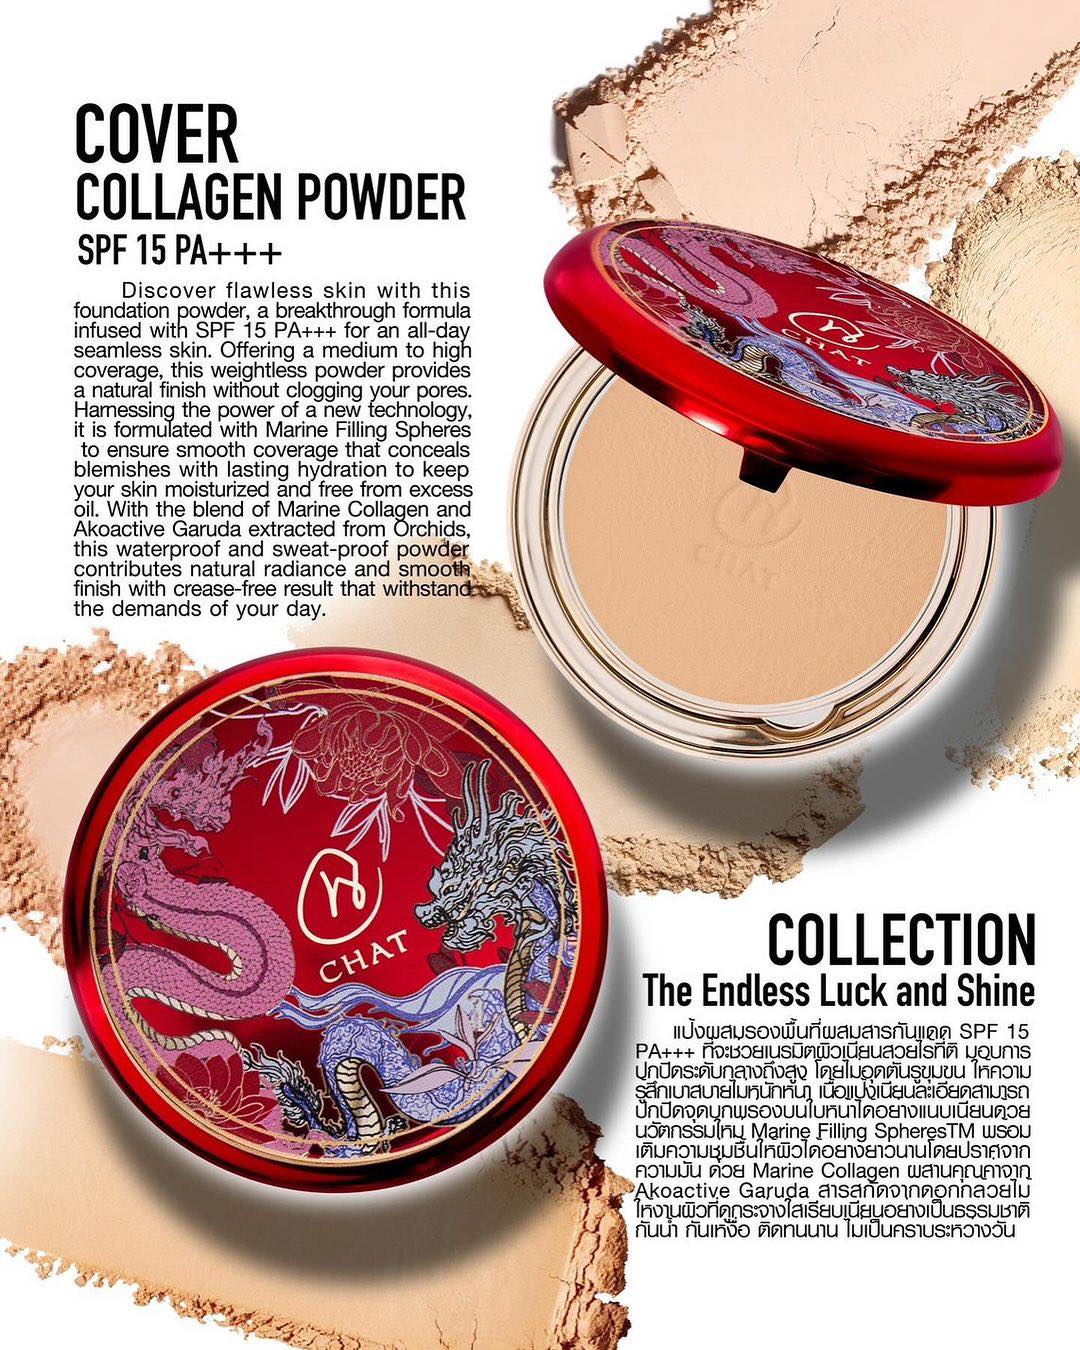 CHAT THE ENDLESS LUCK AND SHINE COVER COLLAGEN POWDER SPF 15 PA+++